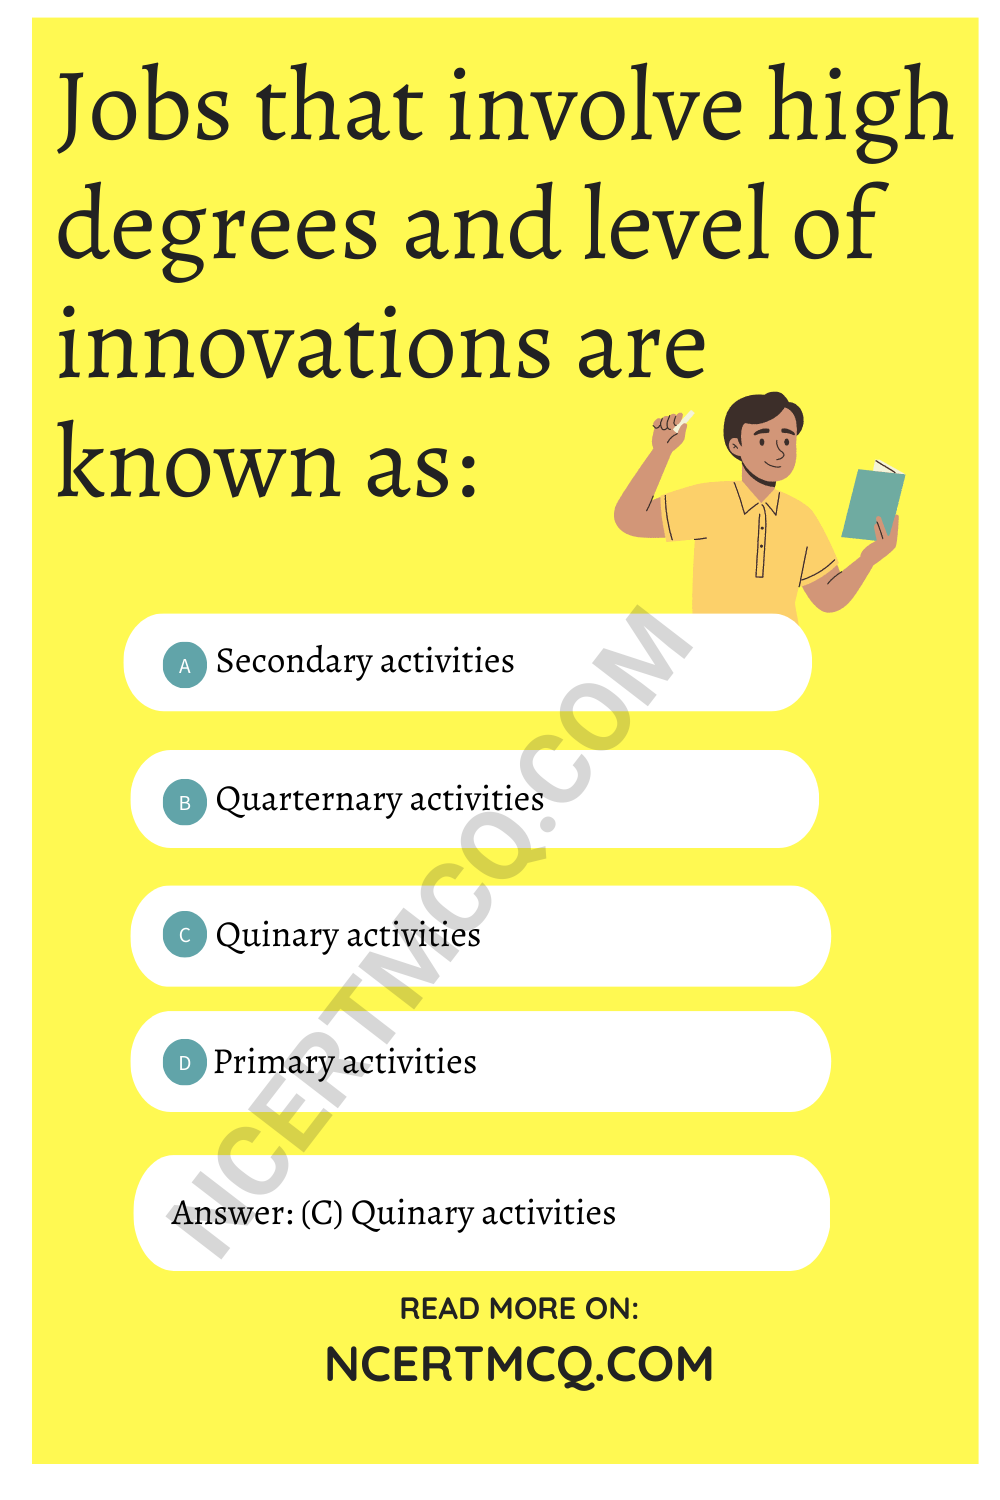 Jobs that involve high degrees and level of innovations are known as: